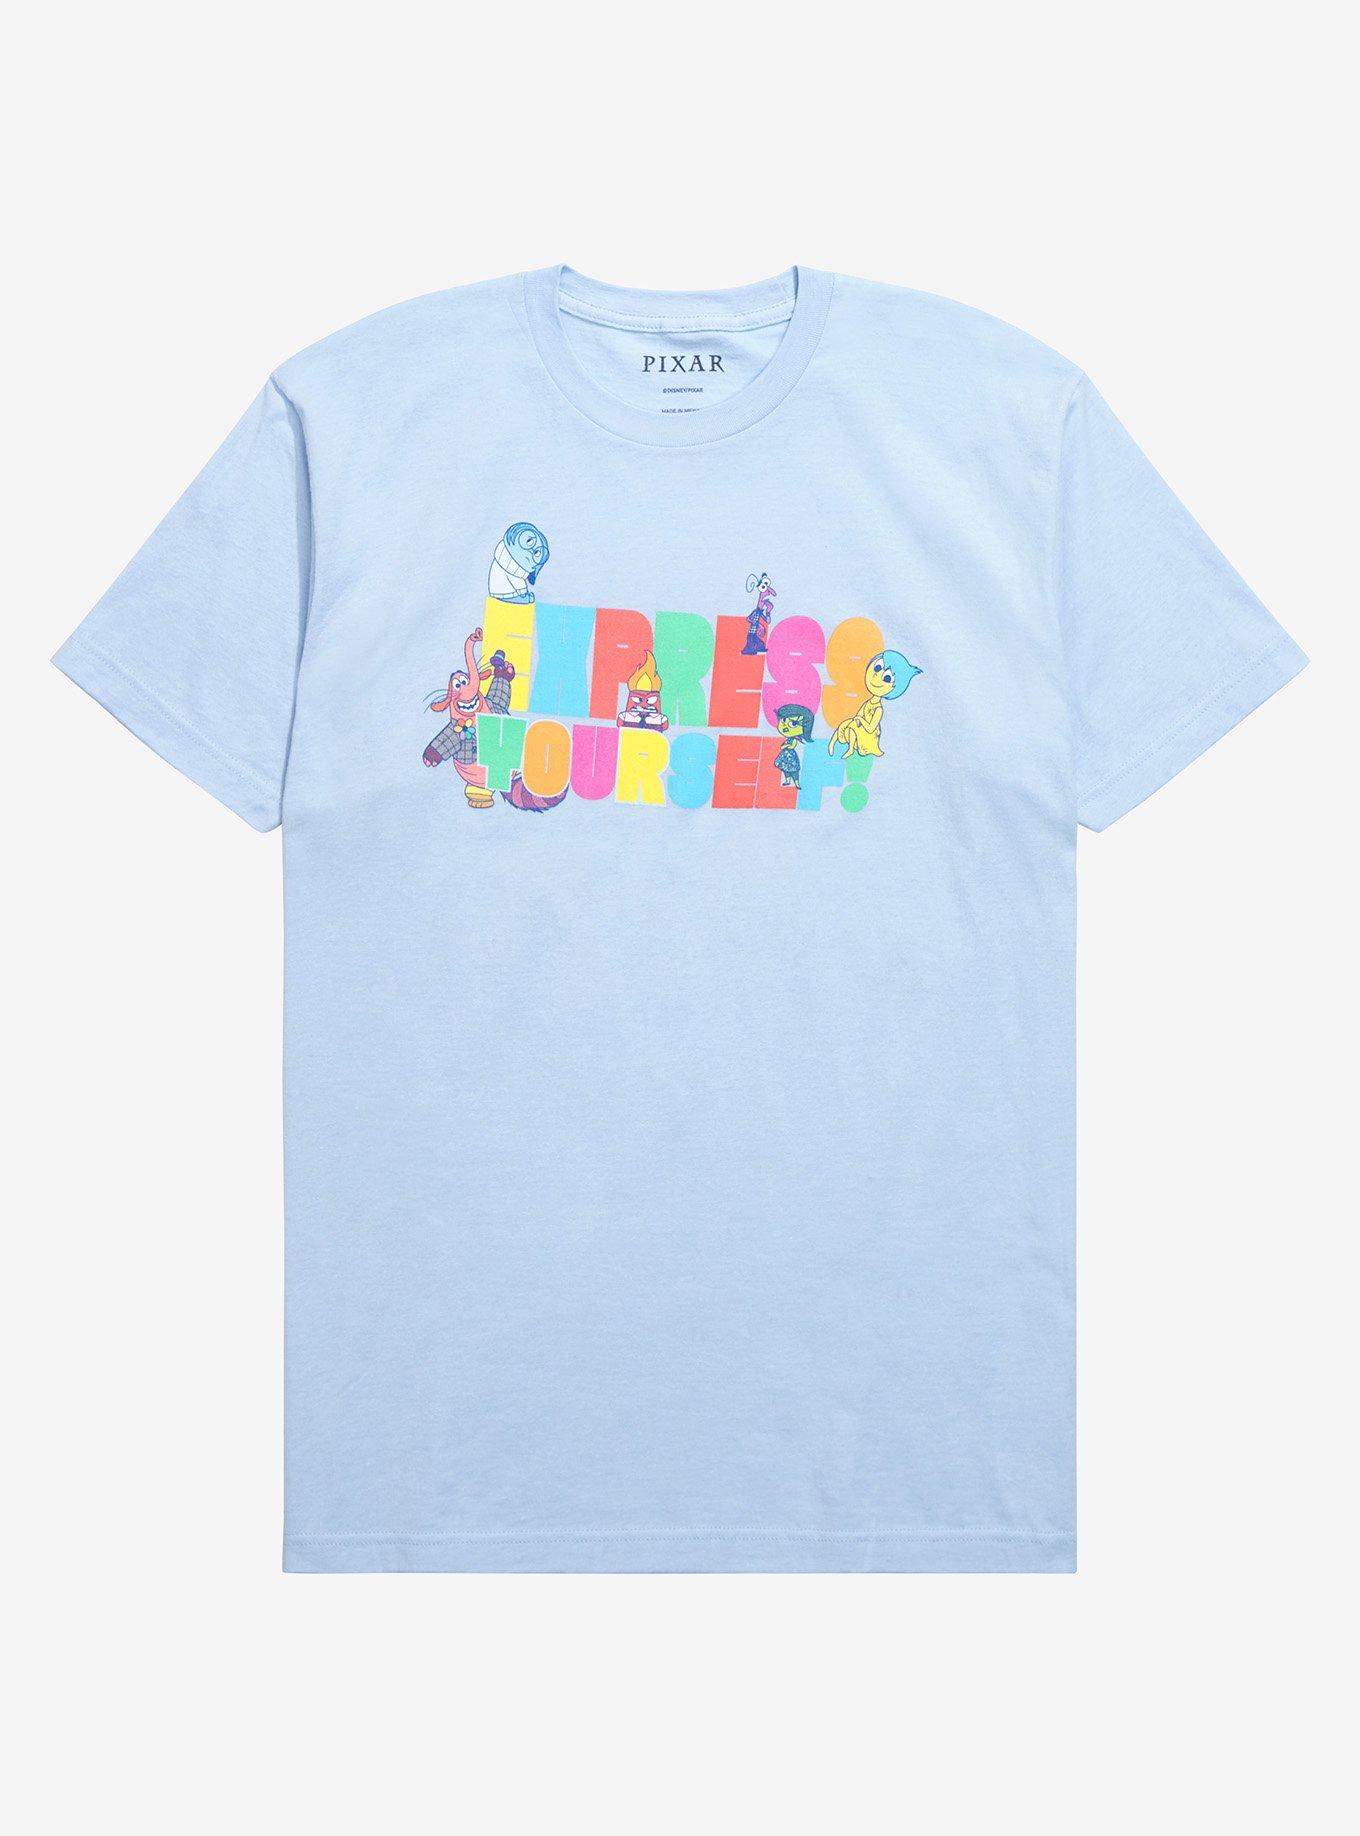 Disney Pixar Inside Out Express Yourself T-Shirt - BoxLunch Exclusive ...